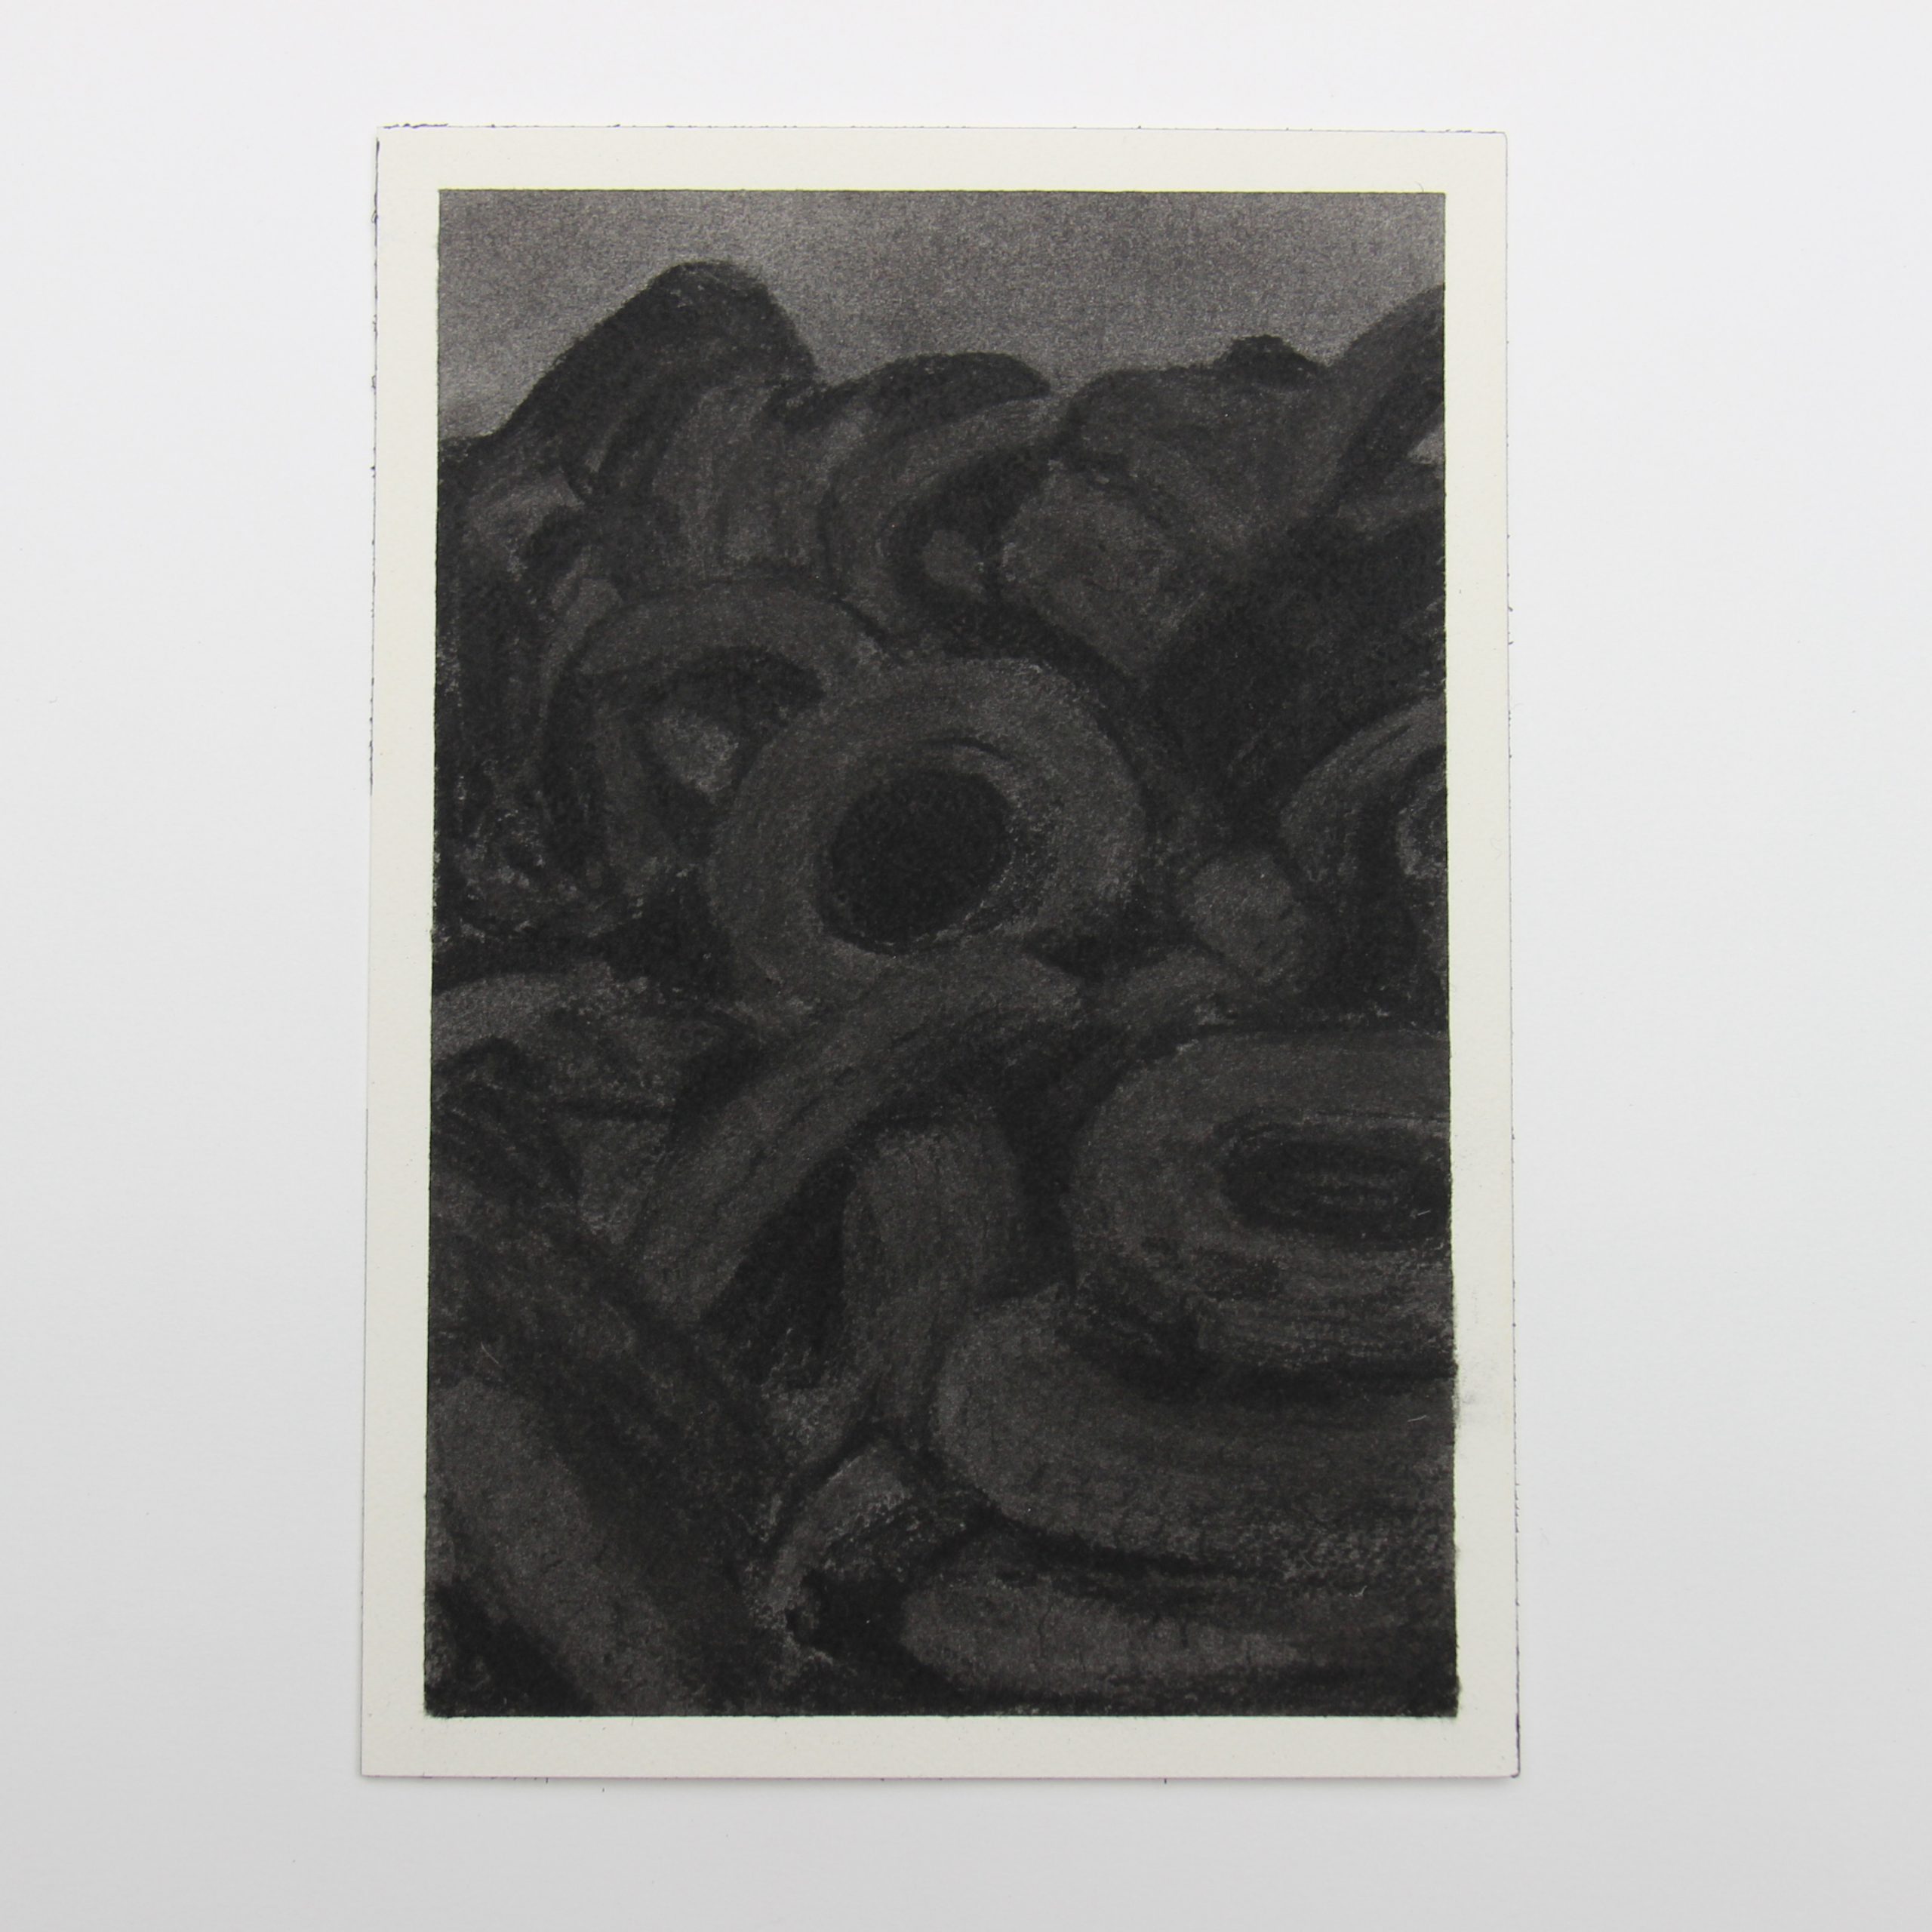 From a distance the drawing looks almost entirely black. When you move closer it reveals a dark landscape comprised of stacked rubber tires and a small area of dark sky all rendered in charcoal